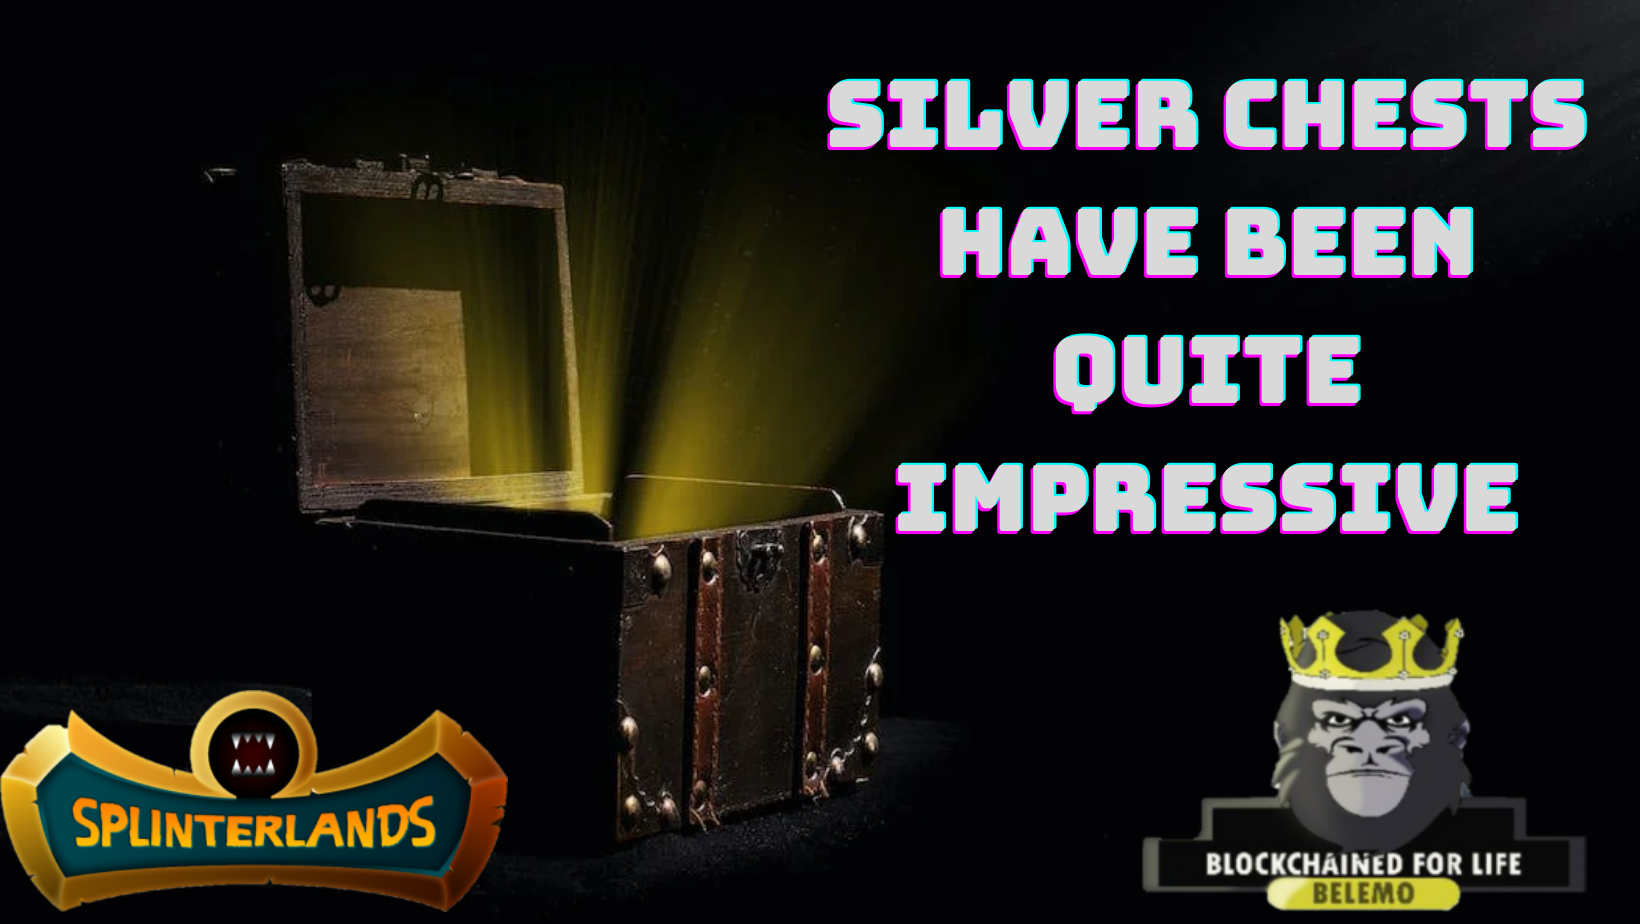 @belemo/silver-chests-aren-t-great-but-they-re-not-so-bad-either